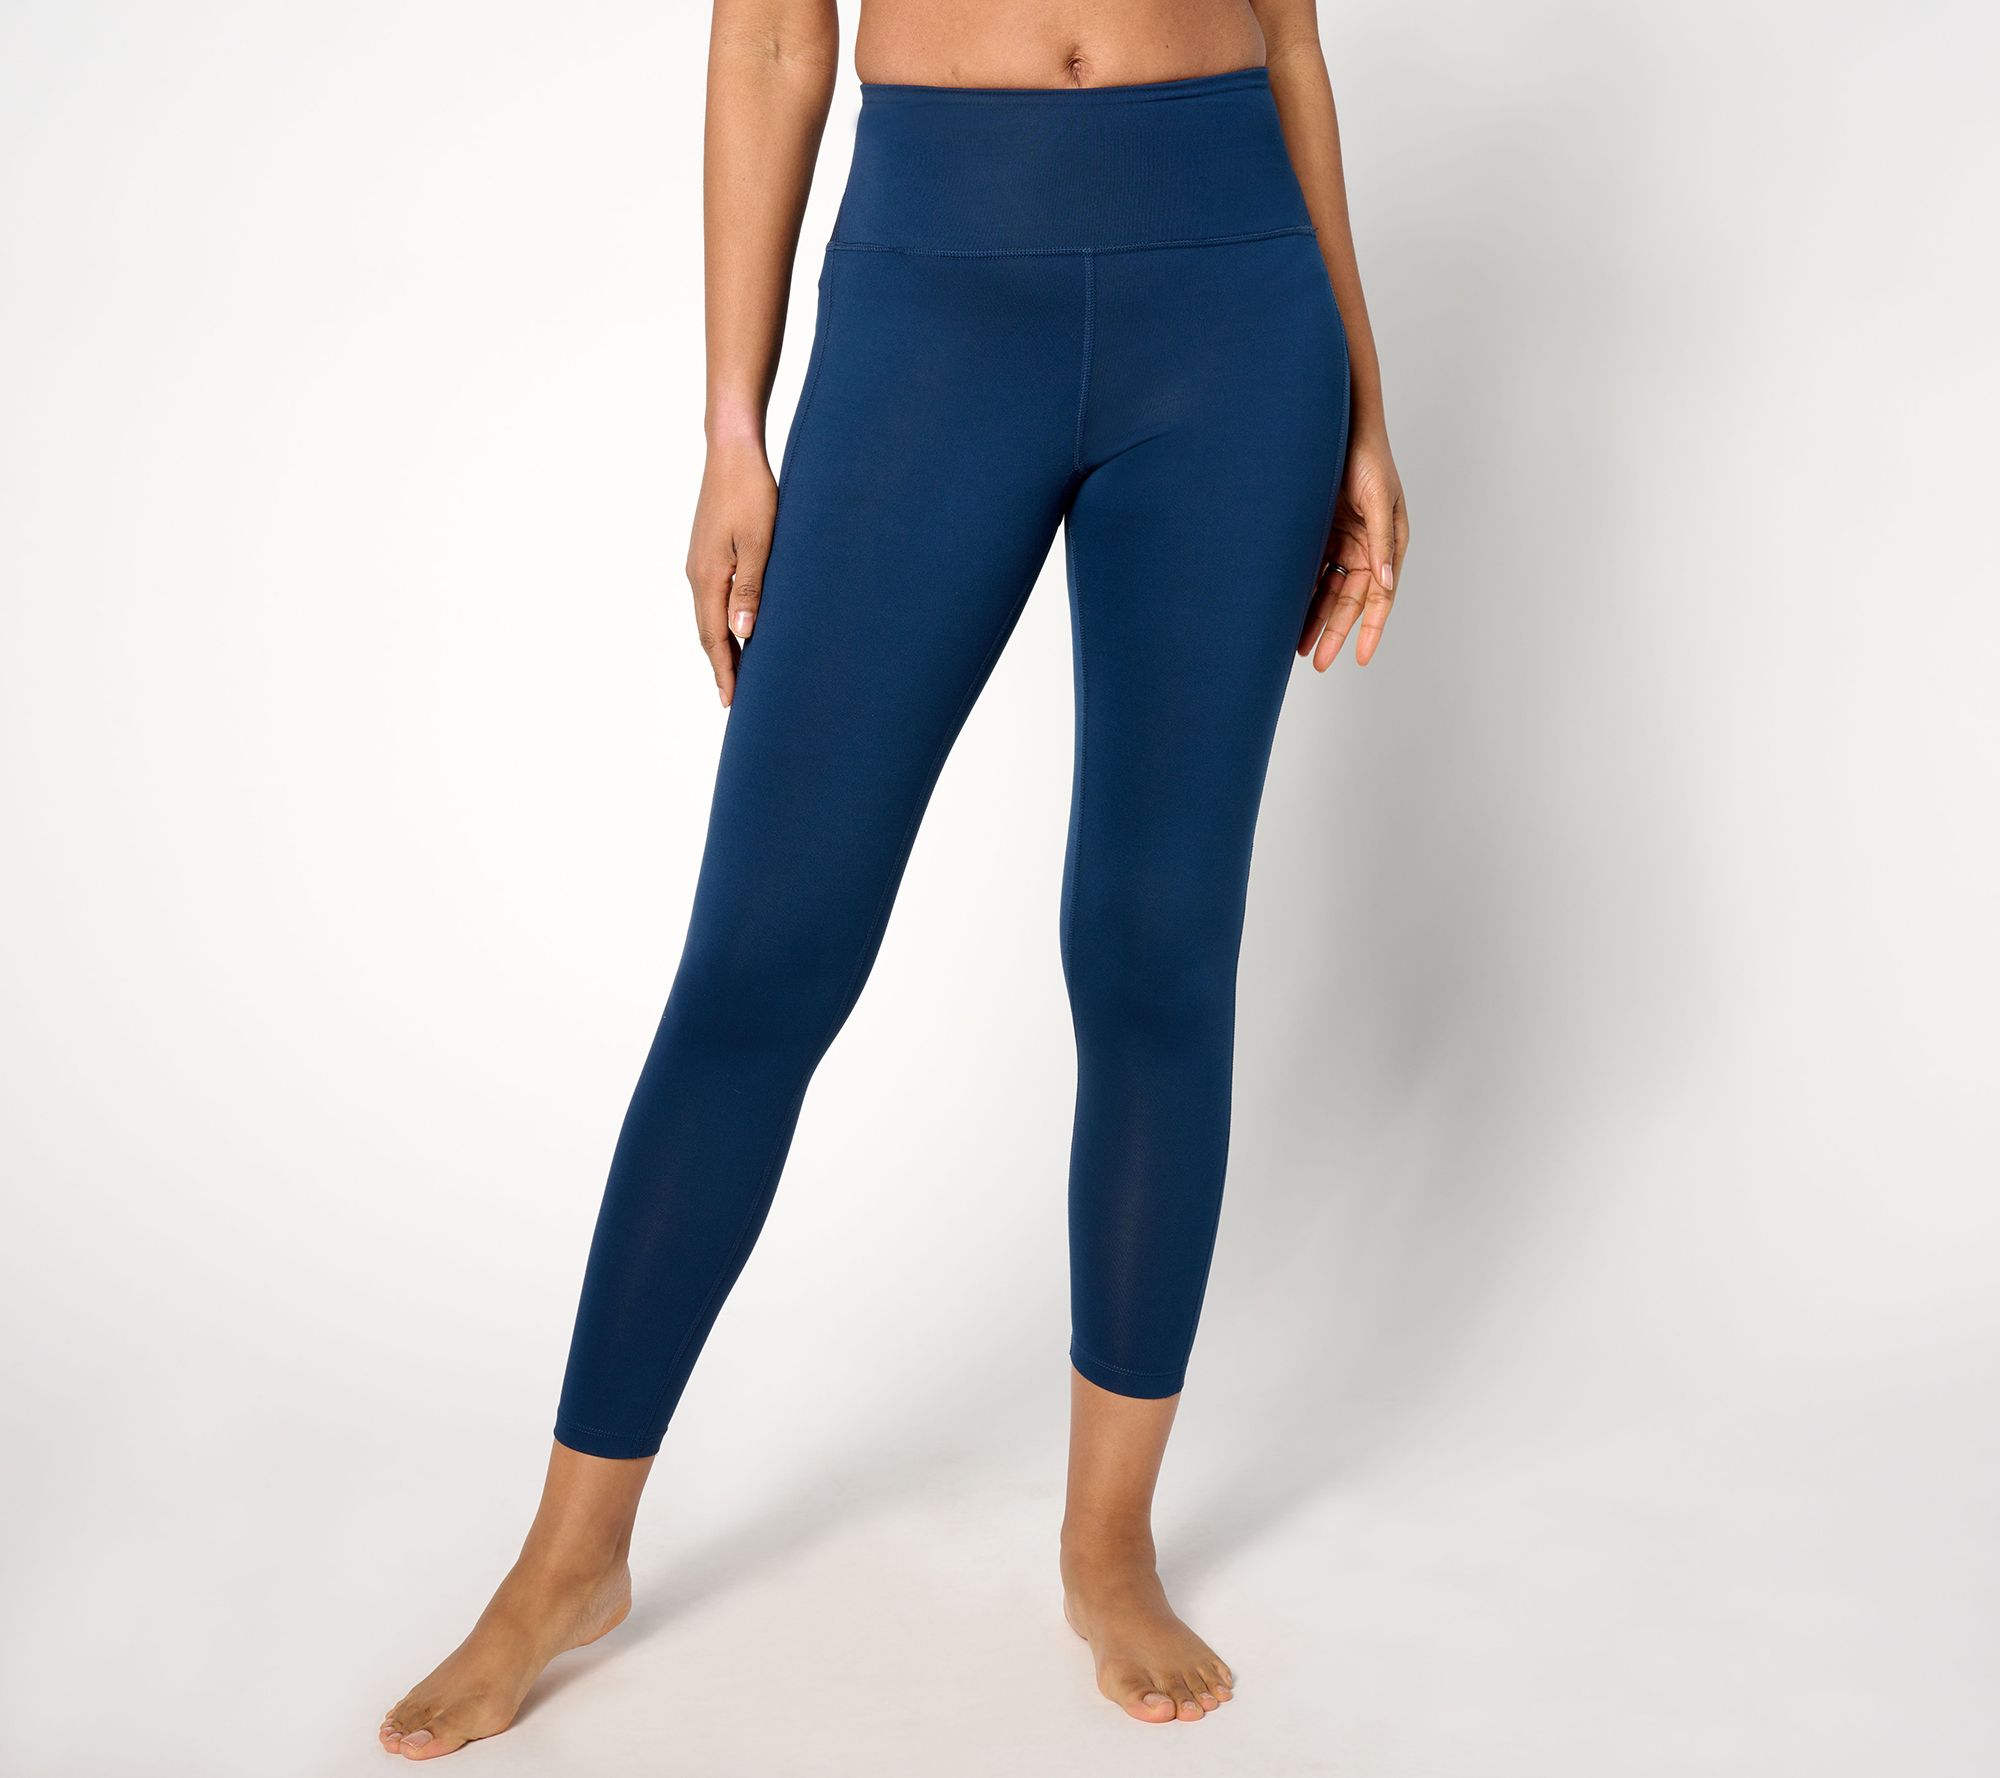 Tommie Copper Lower Back Support Compression Leggings 